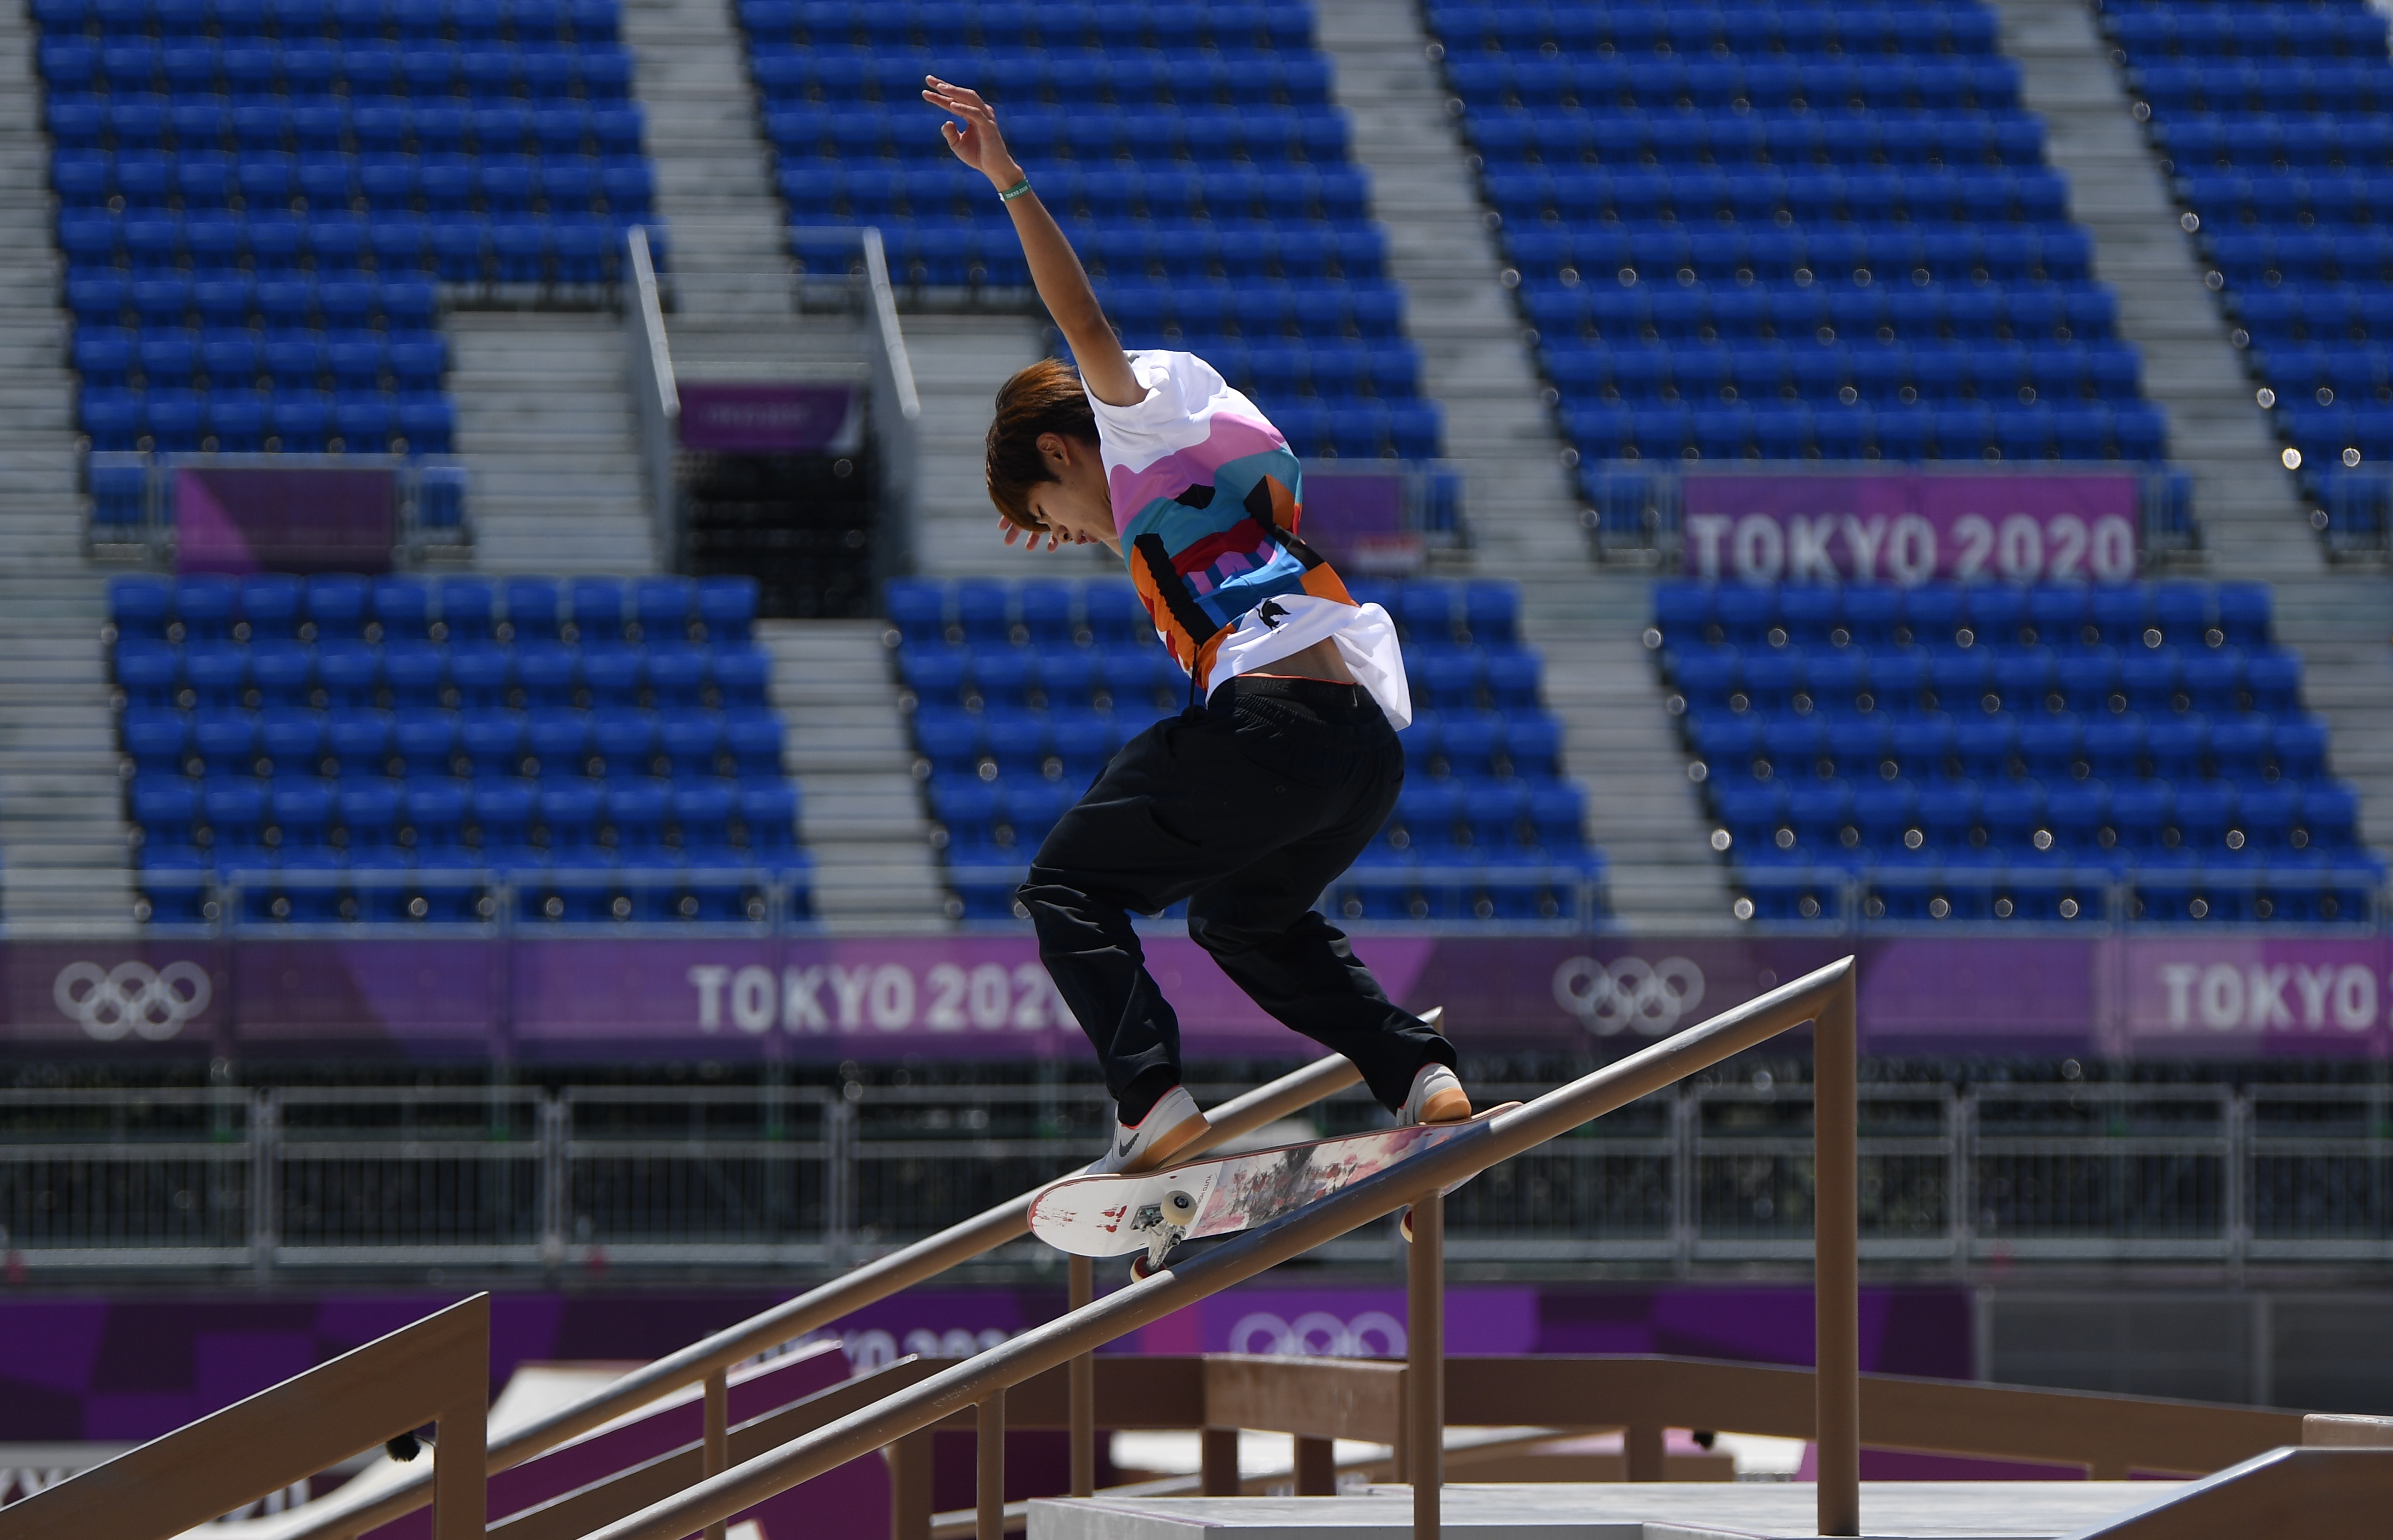 First Olympic skateboarding gold goes to hometown hero Horigome: “I still cannot believe I am in the Olympics right now.”